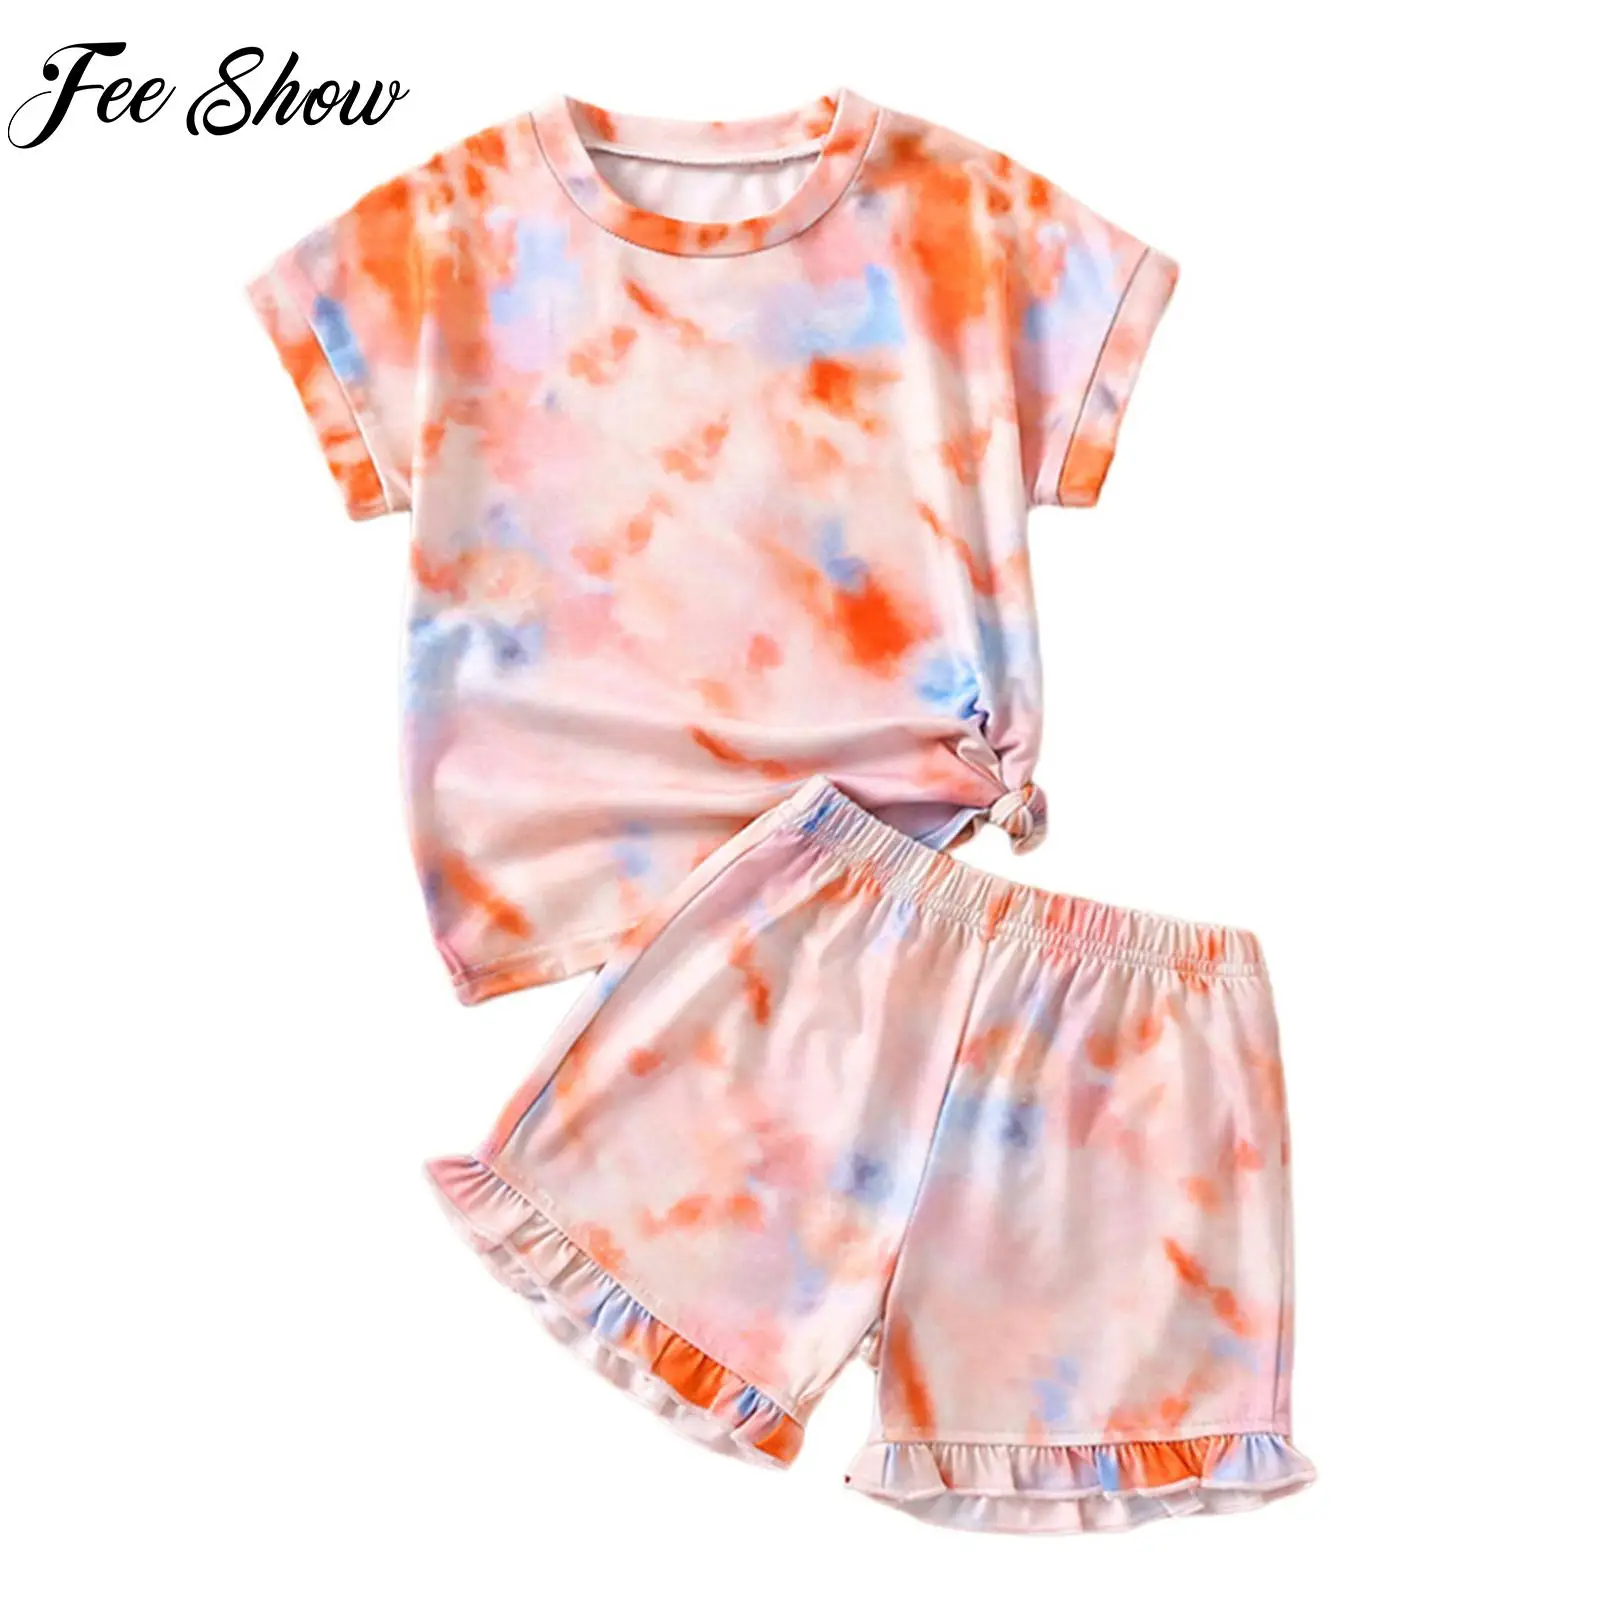 

Orange Kids Girls Tie Dye Print Two Piece Sportsuit Round Neck Short Sleeve Casual T-shirt Shorts Set Sport Outfit